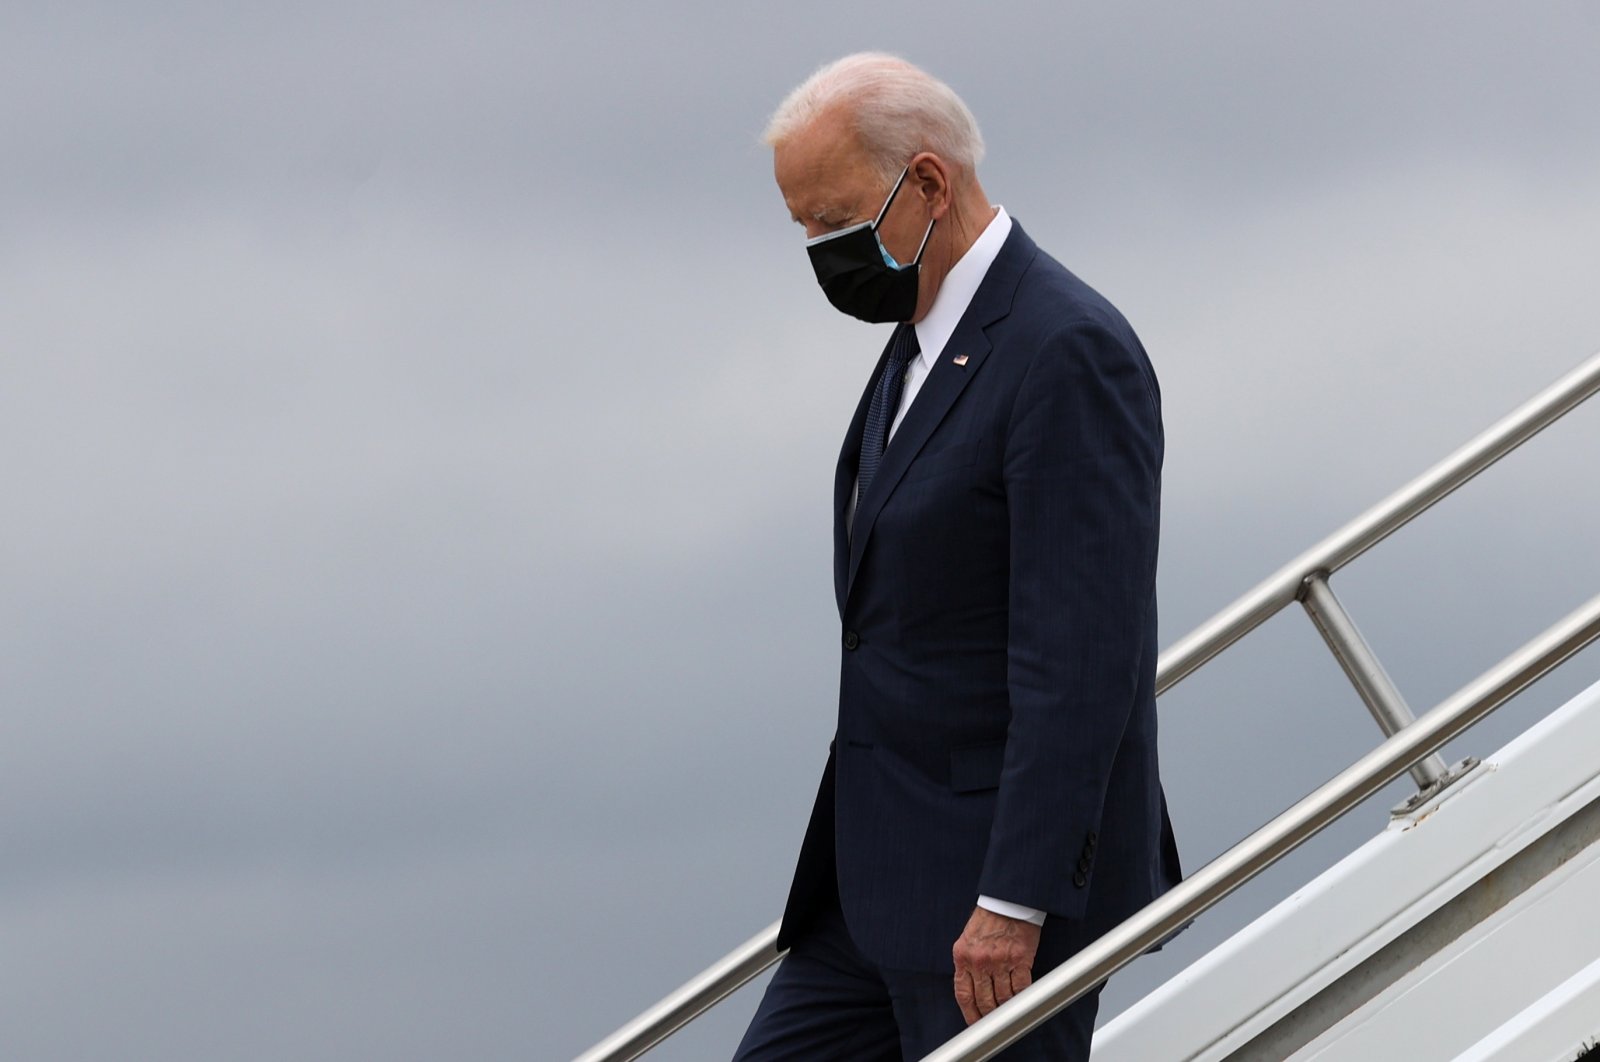 U.S. President Joe Biden disembarks from Air Force One as he arrives at Pittsburgh International Airport in Pittsburgh, Pennsylvania, U.S., March 31, 2021. (Reuters Photo)